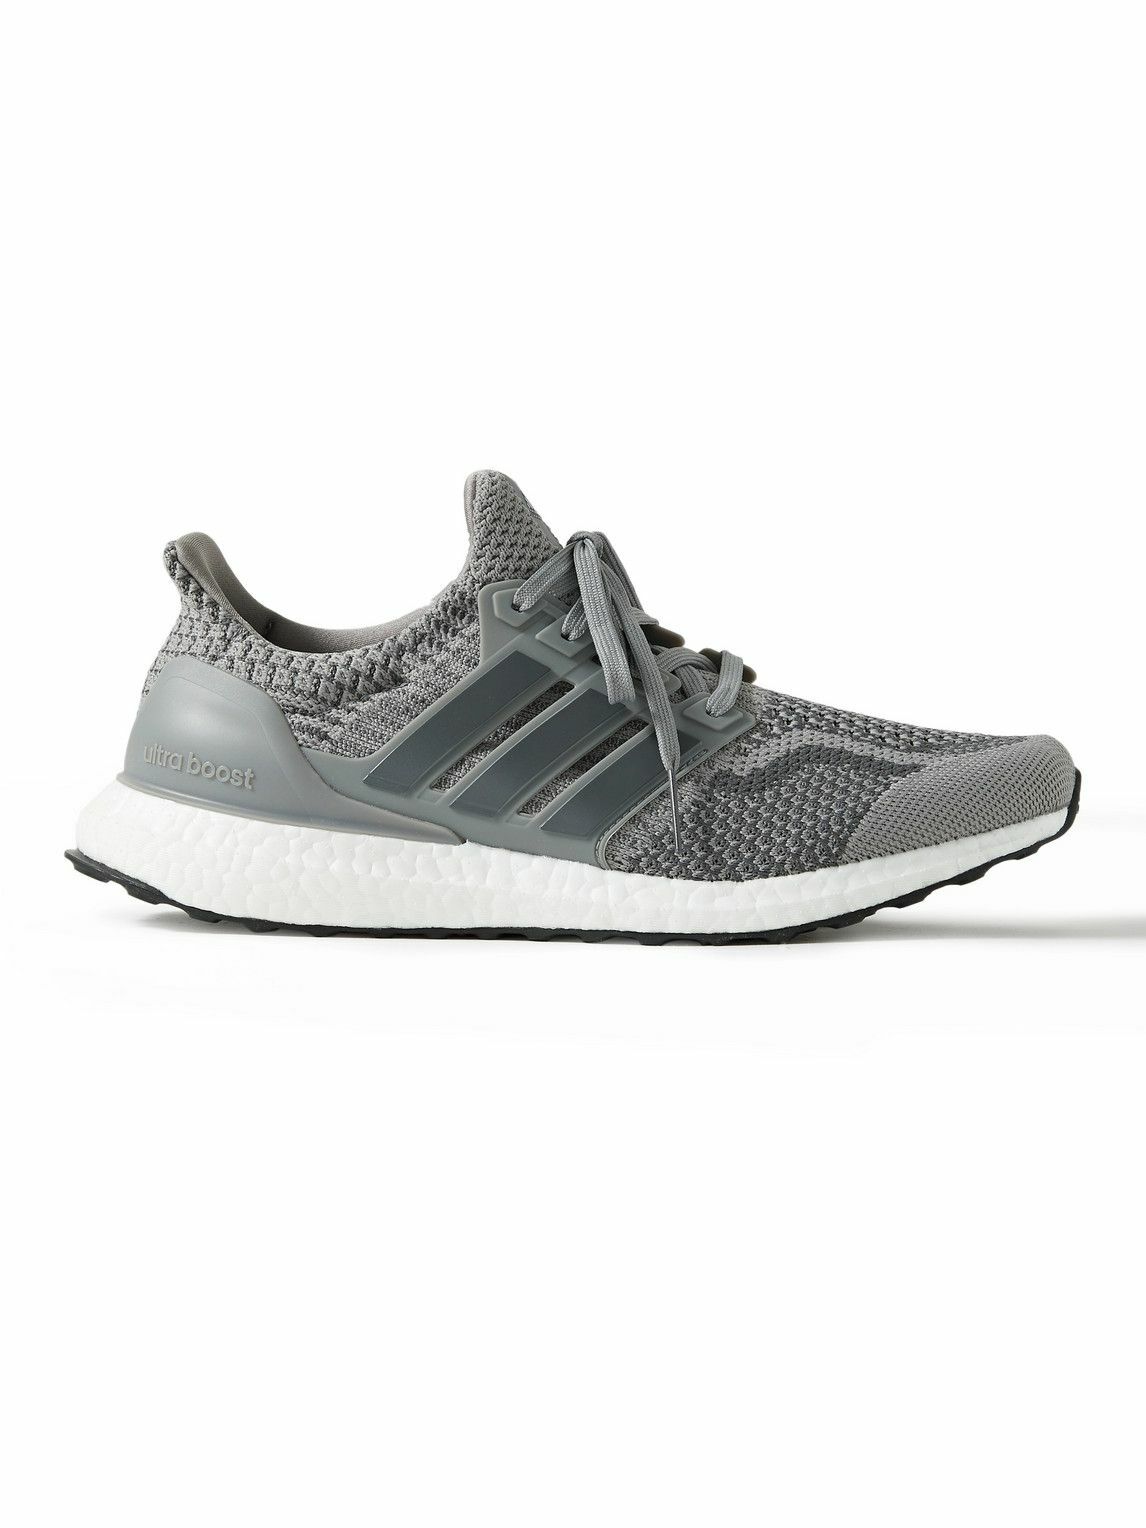 Photo: adidas Sport - Ultraboost 5.0 DNA Rubber-Trimmed Primeknit Running Sneakers - Gray